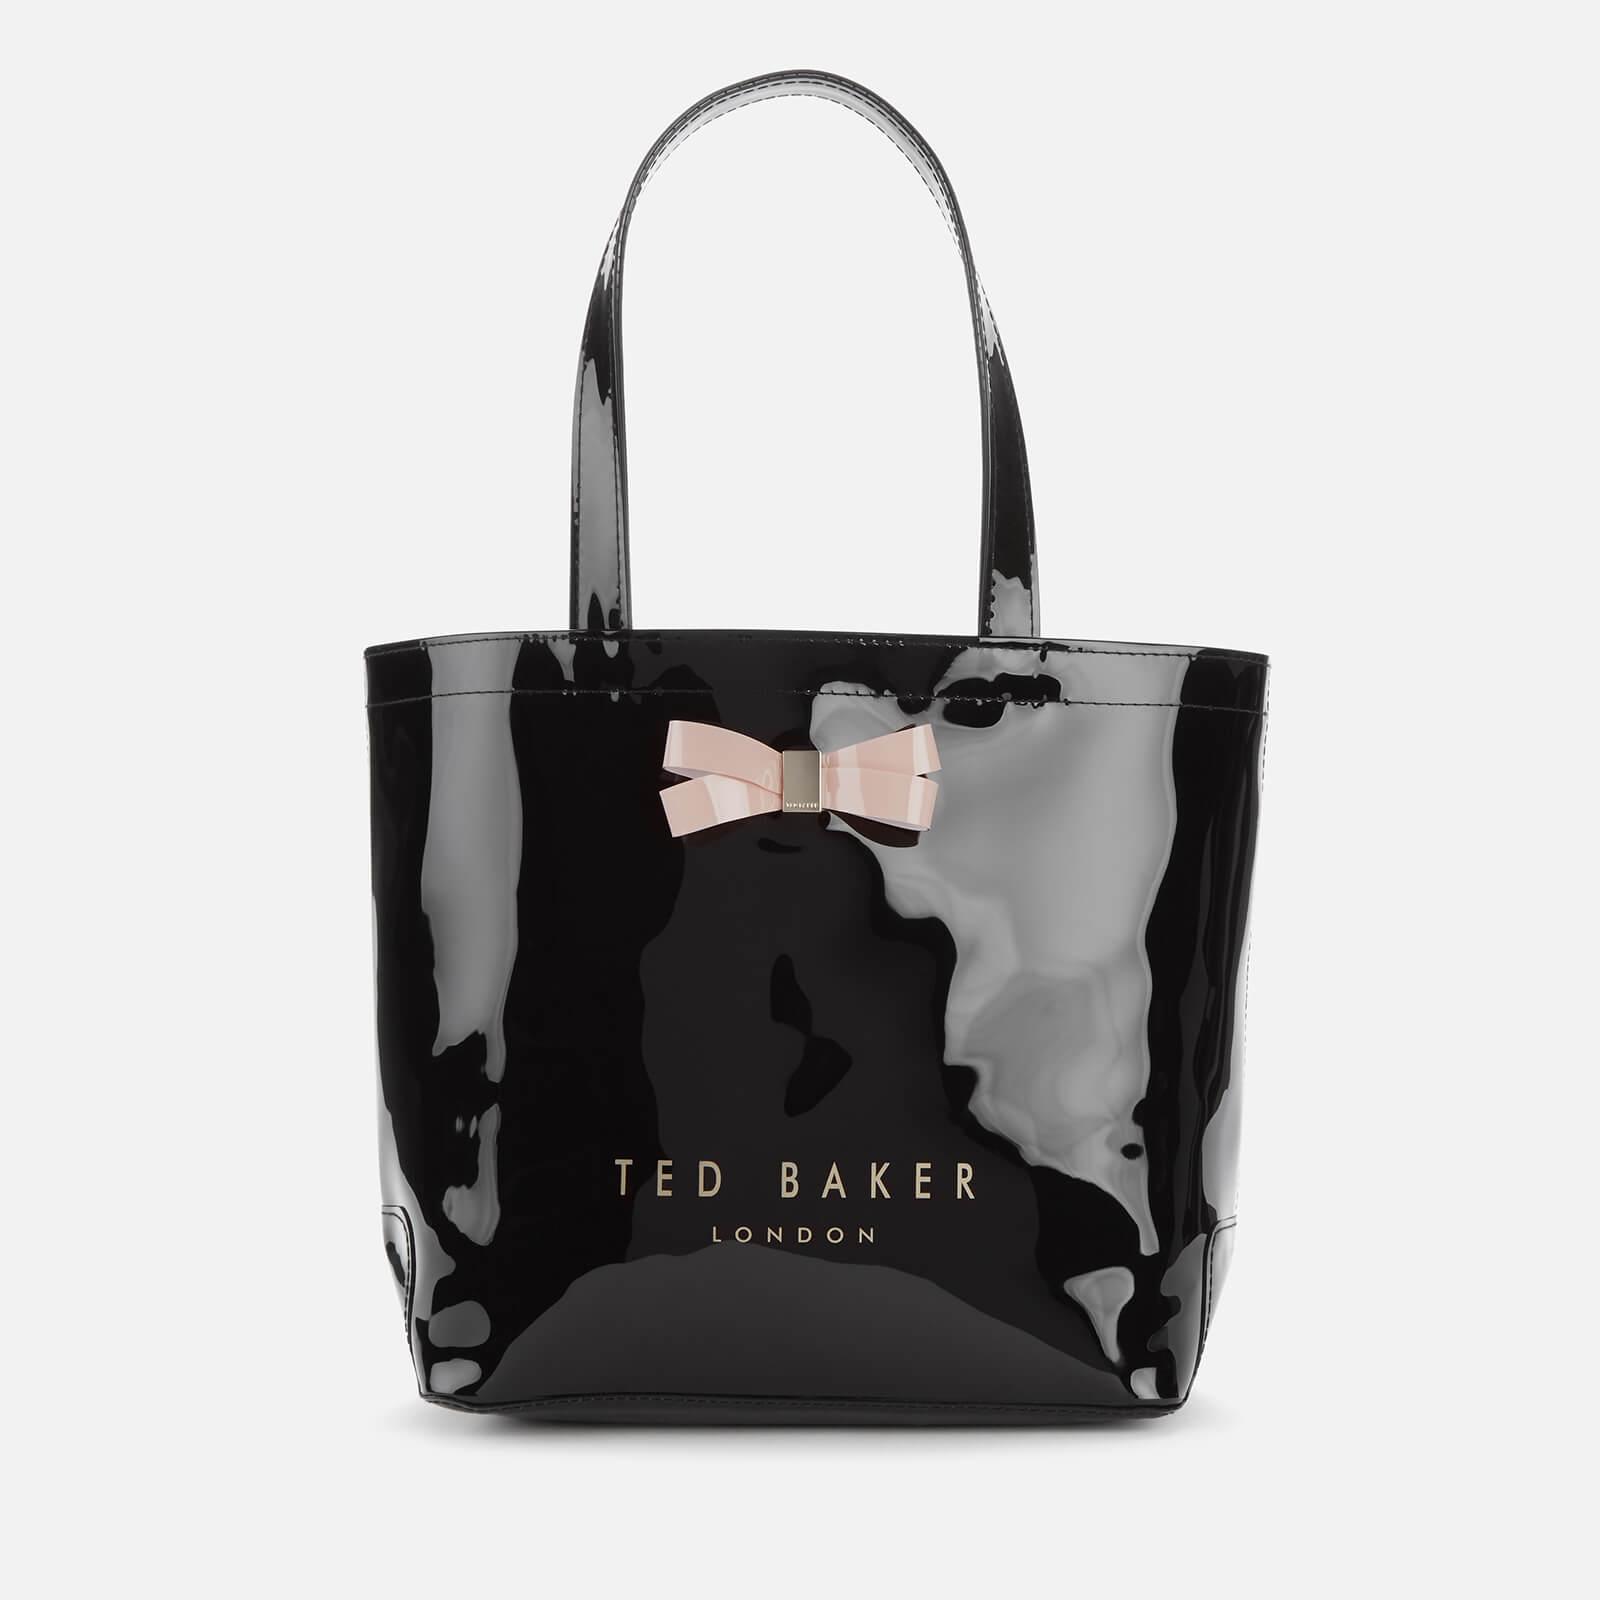 Special offer > cheap ted baker bags, Up to 68% OFF